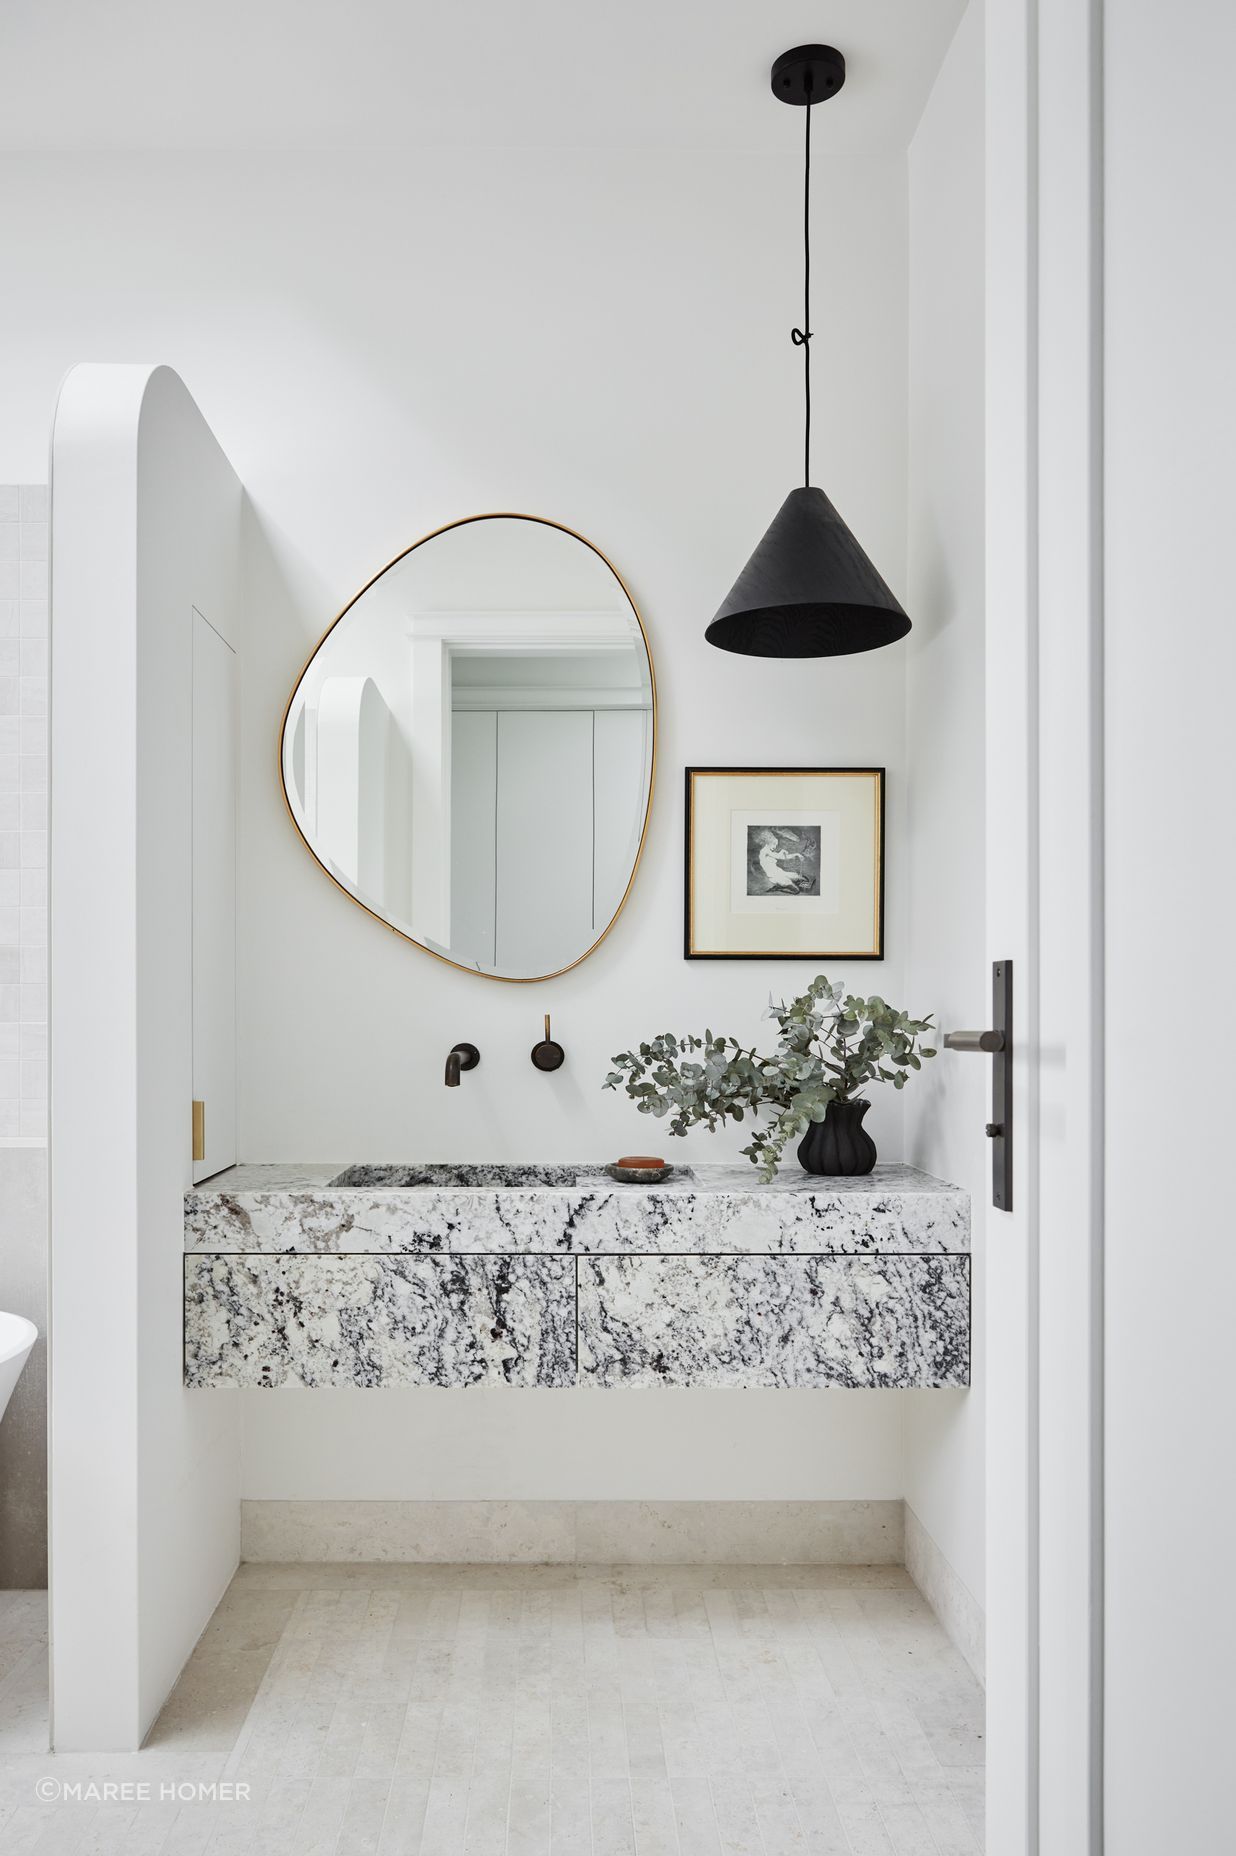 MAIN BATHROOM Summit 330 pendant light, About Space. Pebble mirror, Life Interiors. White granite vanity, Granite &amp; Marble Works. Brodware ‘City Stik’ wall mixer, Sydney Tap and Bathroomware. Limestone floor tiles, Onsite Supply+Design. Boost wall tiles, Rocks On.